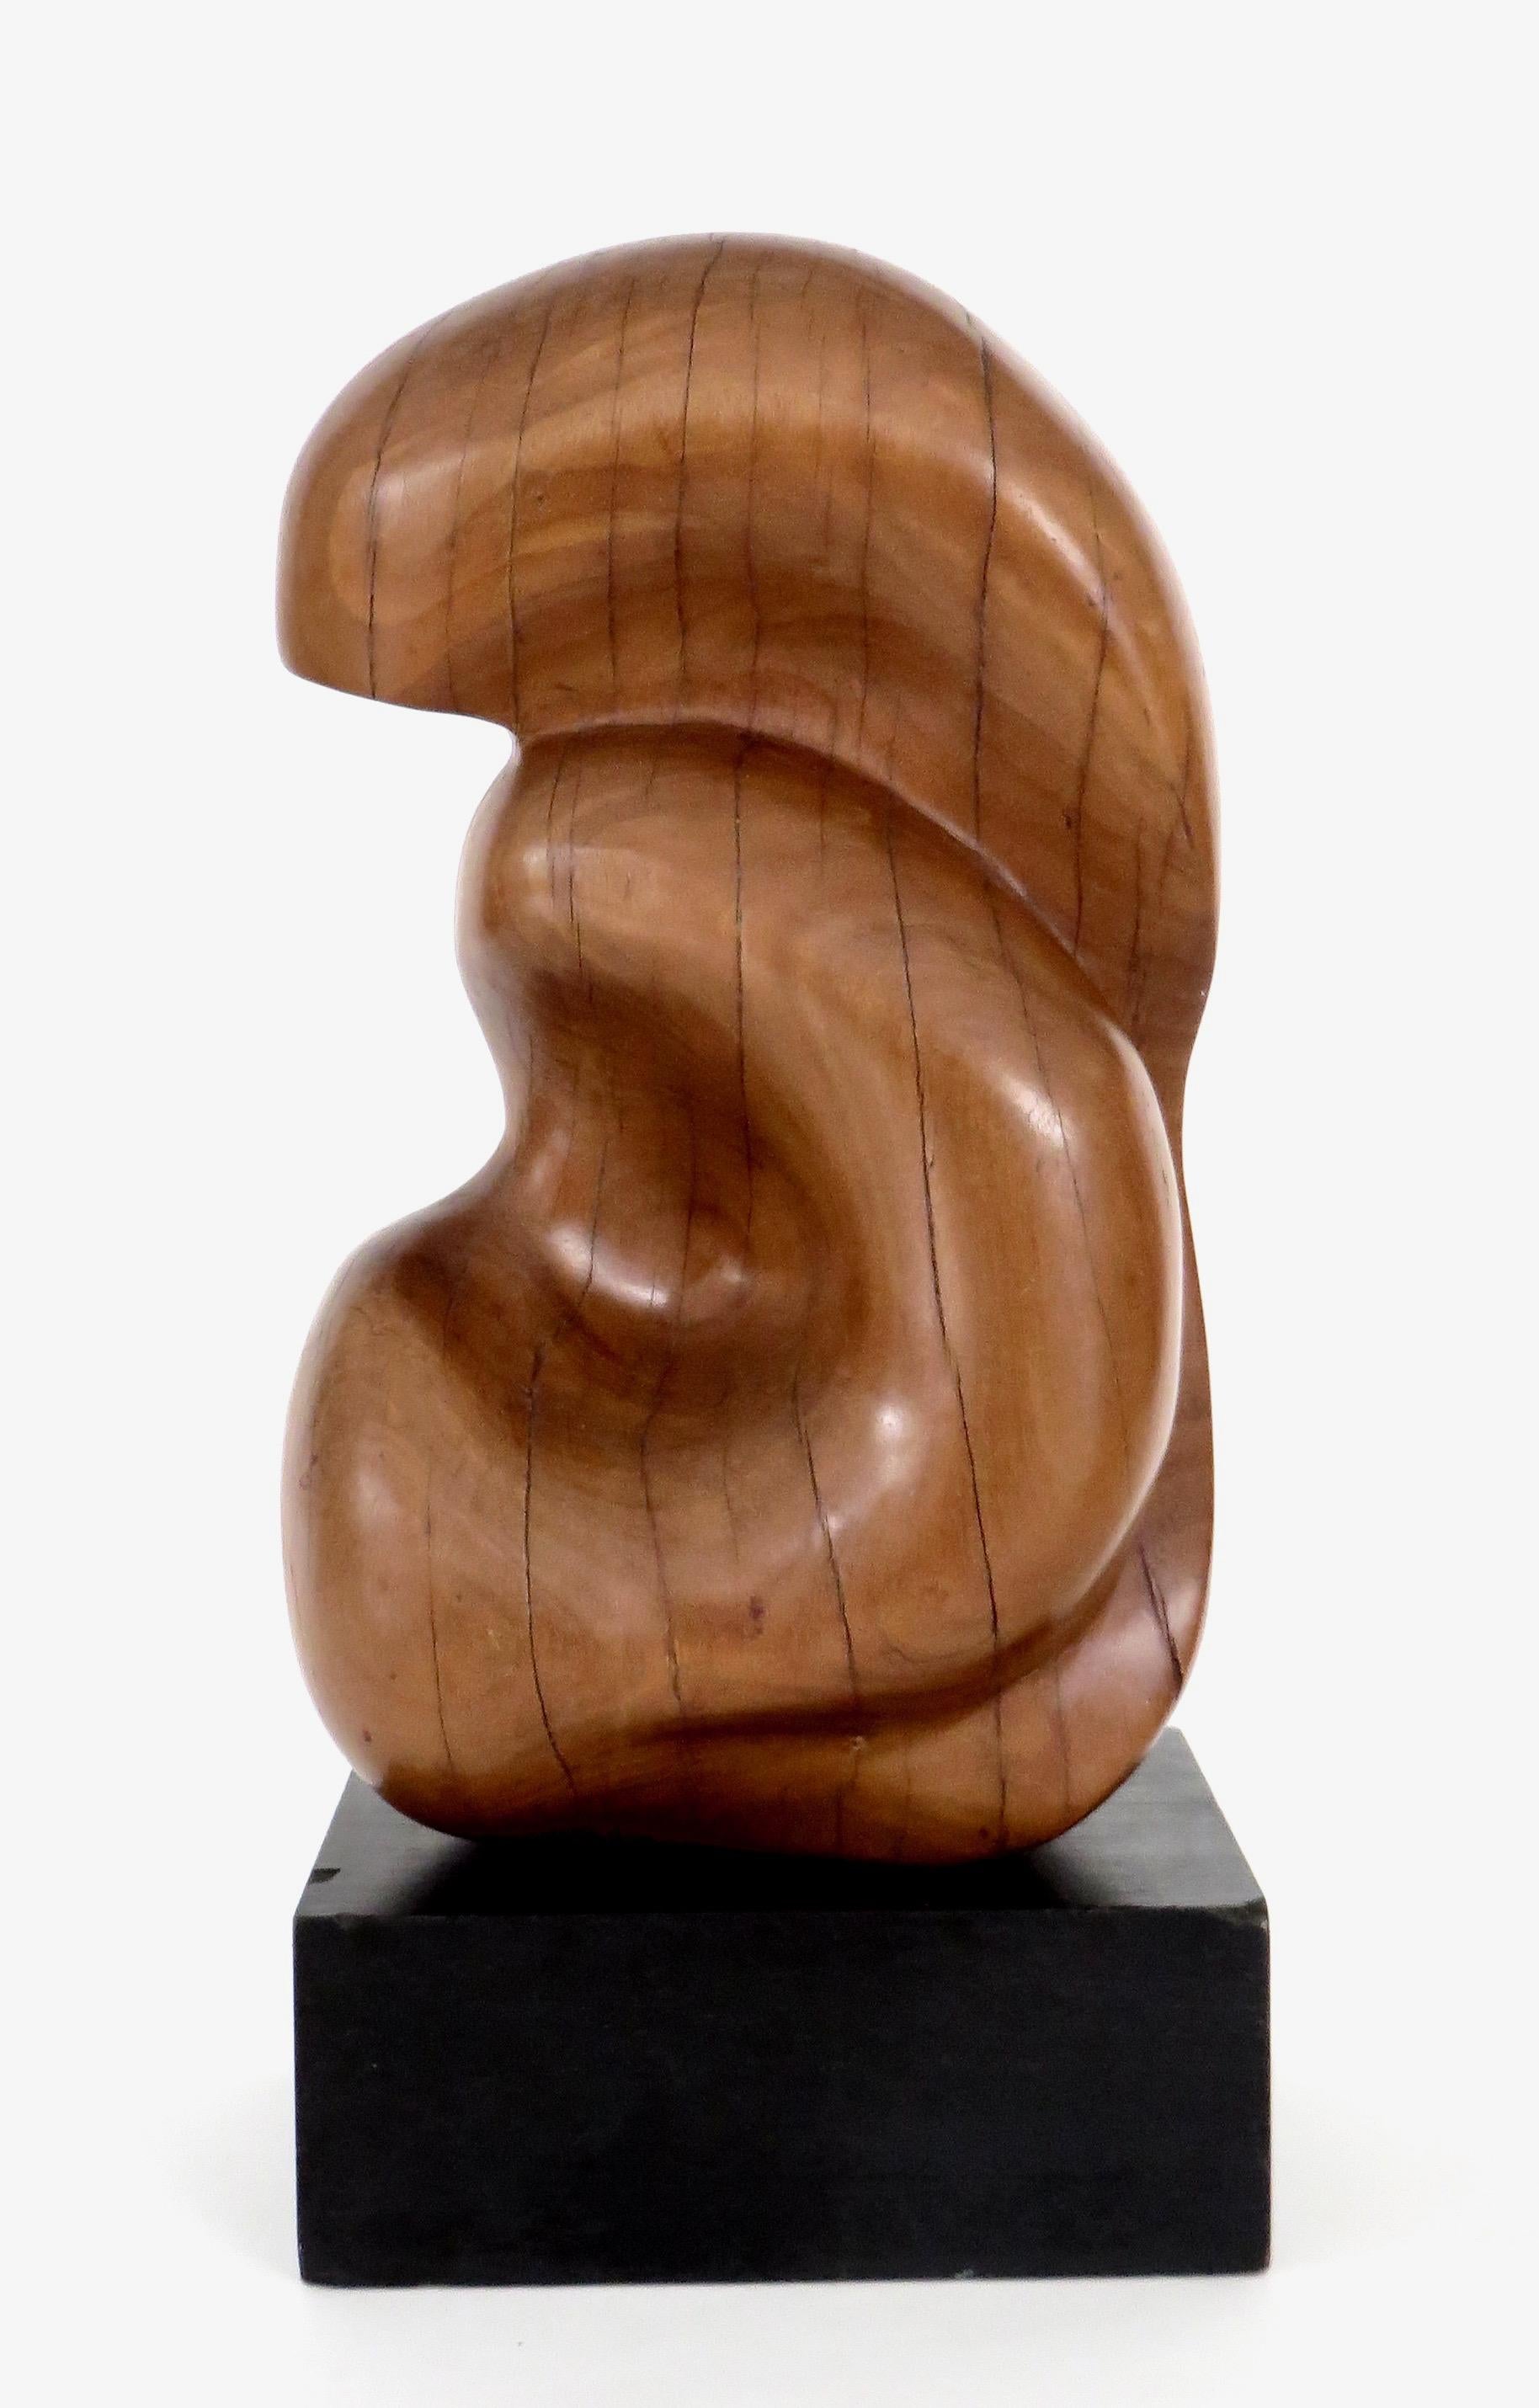 A modern abstract sculpture by an unknown artist, crafted of wood, carved and smoothed into a highly organic and bio morphic shape on a black wood plinth. 
Overall size: 7.5